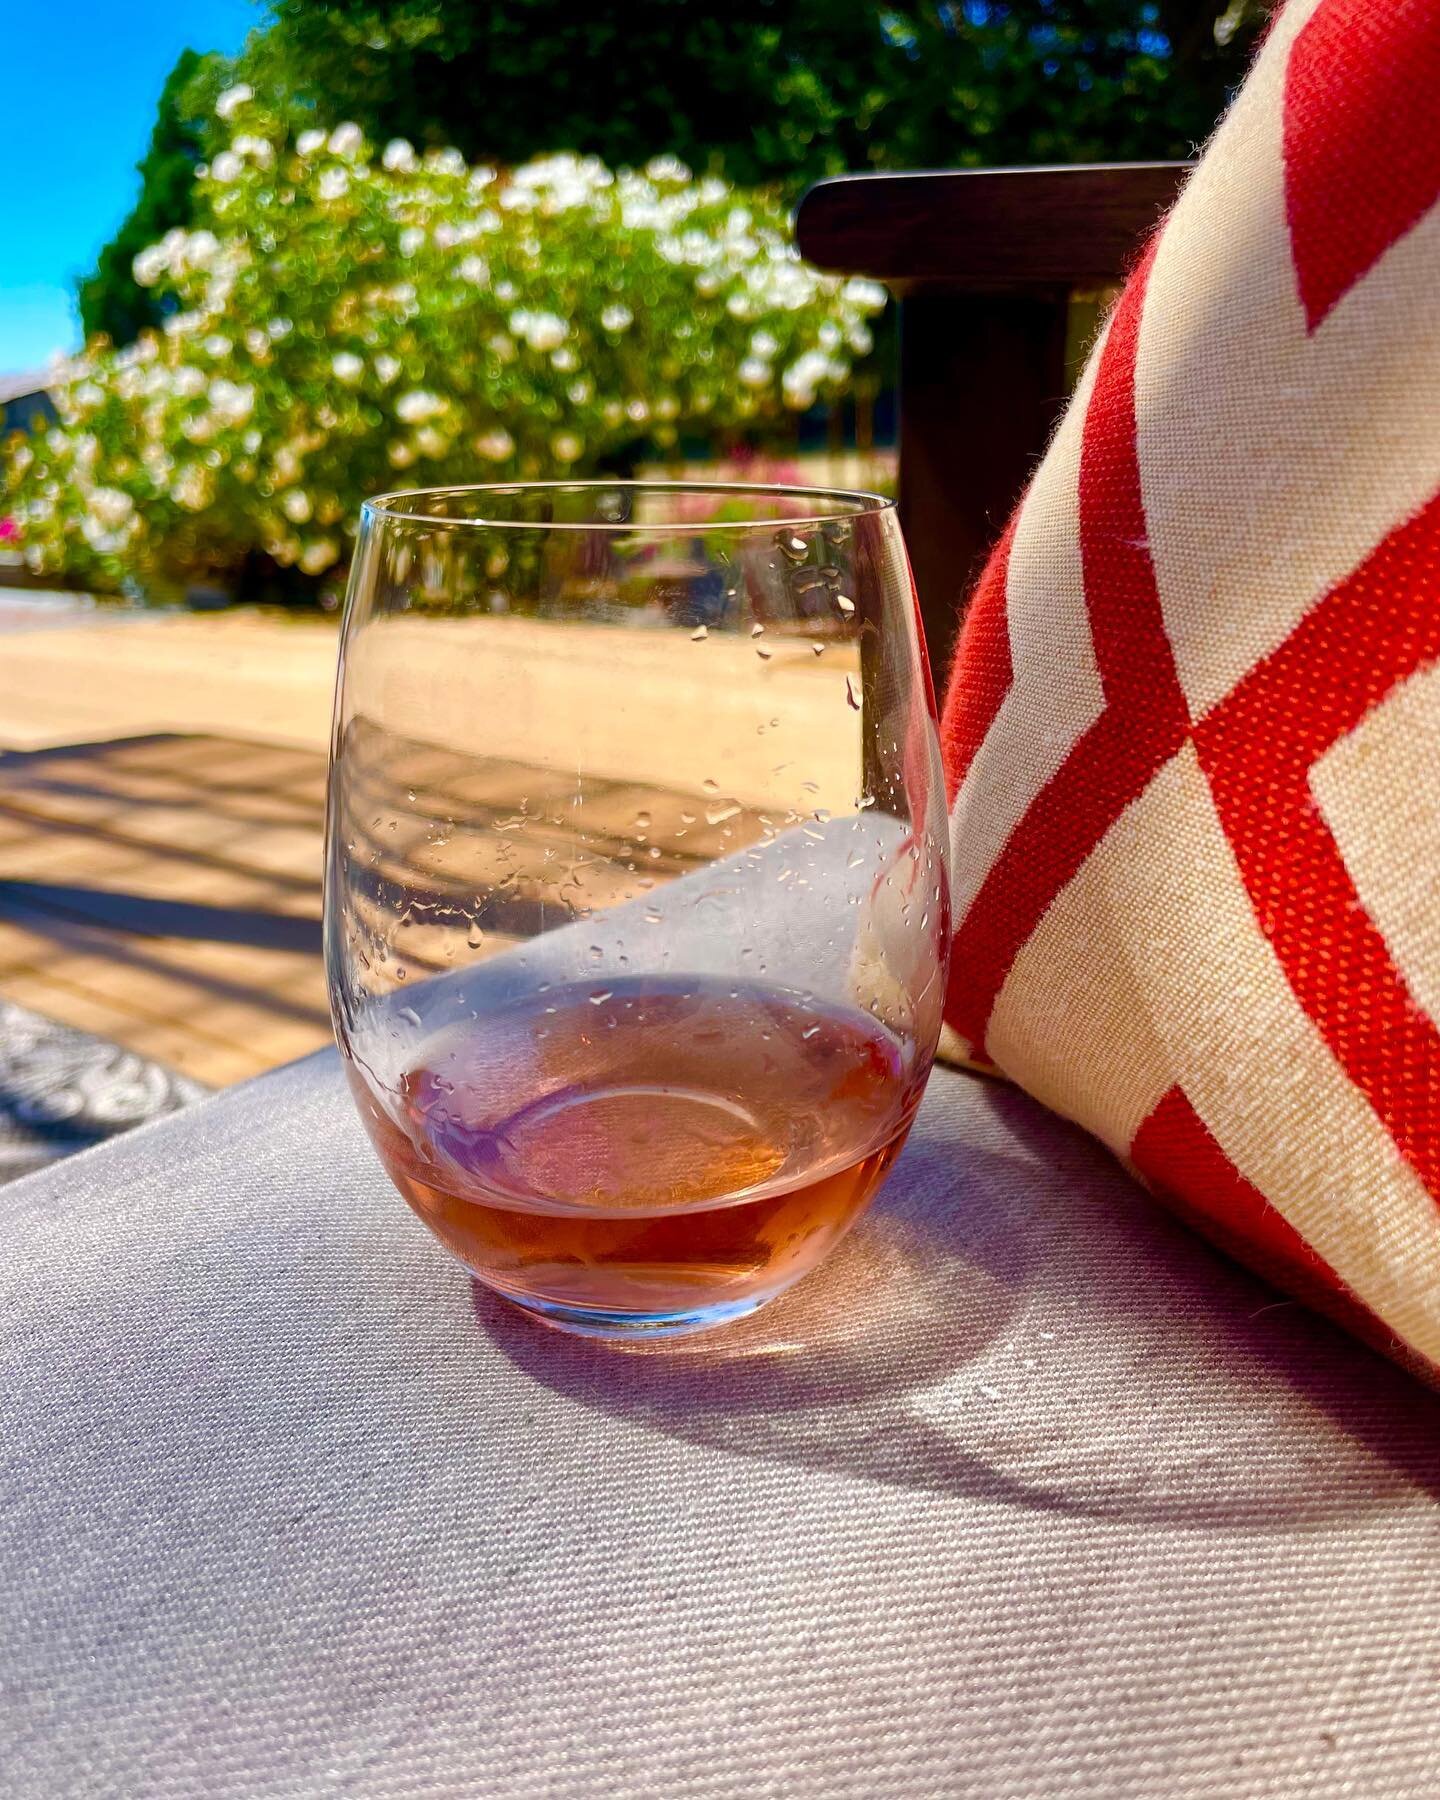 Summer Vacations are made for Ros&eacute; or is it the other way around, we forget. 

.
.
.
#mcilroy
#mcilroywines 
#mcilroycellars 
#singlevineyard
#aquariusranch
#aquariusranchvineyard
#zabalavineyard
#chockrockvineyard
#familywinery 
#whitewine
#c